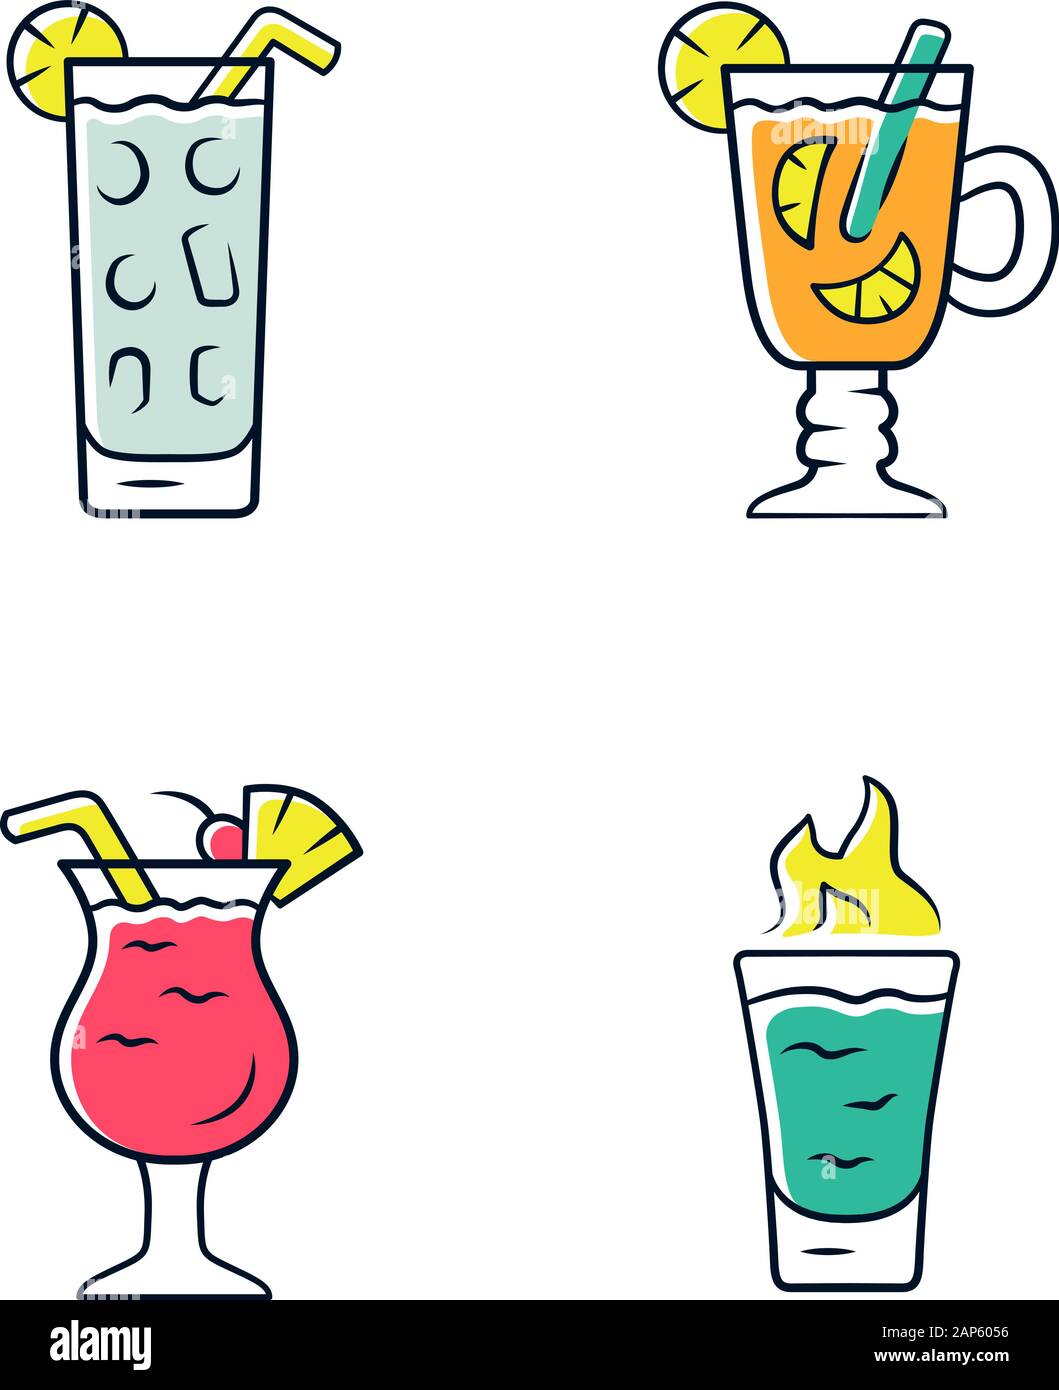 https://c8.alamy.com/comp/2AP6056/drinks-color-icons-set-cocktail-in-highball-glass-hot-toddy-pina-colada-flaming-shot-alcoholic-mixes-and-soft-drinks-refreshing-and-warming-beve-2AP6056.jpg